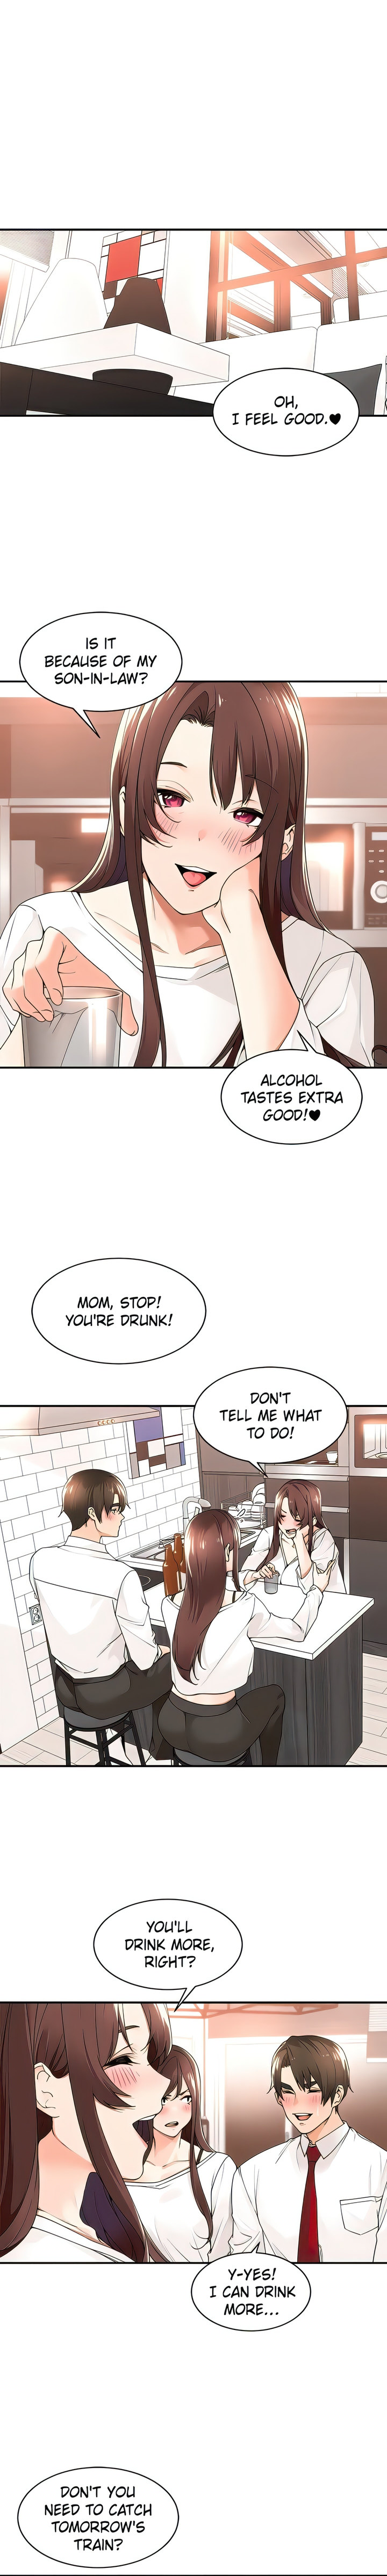 Manager, Please Scold Me - Chapter 30 Page 1